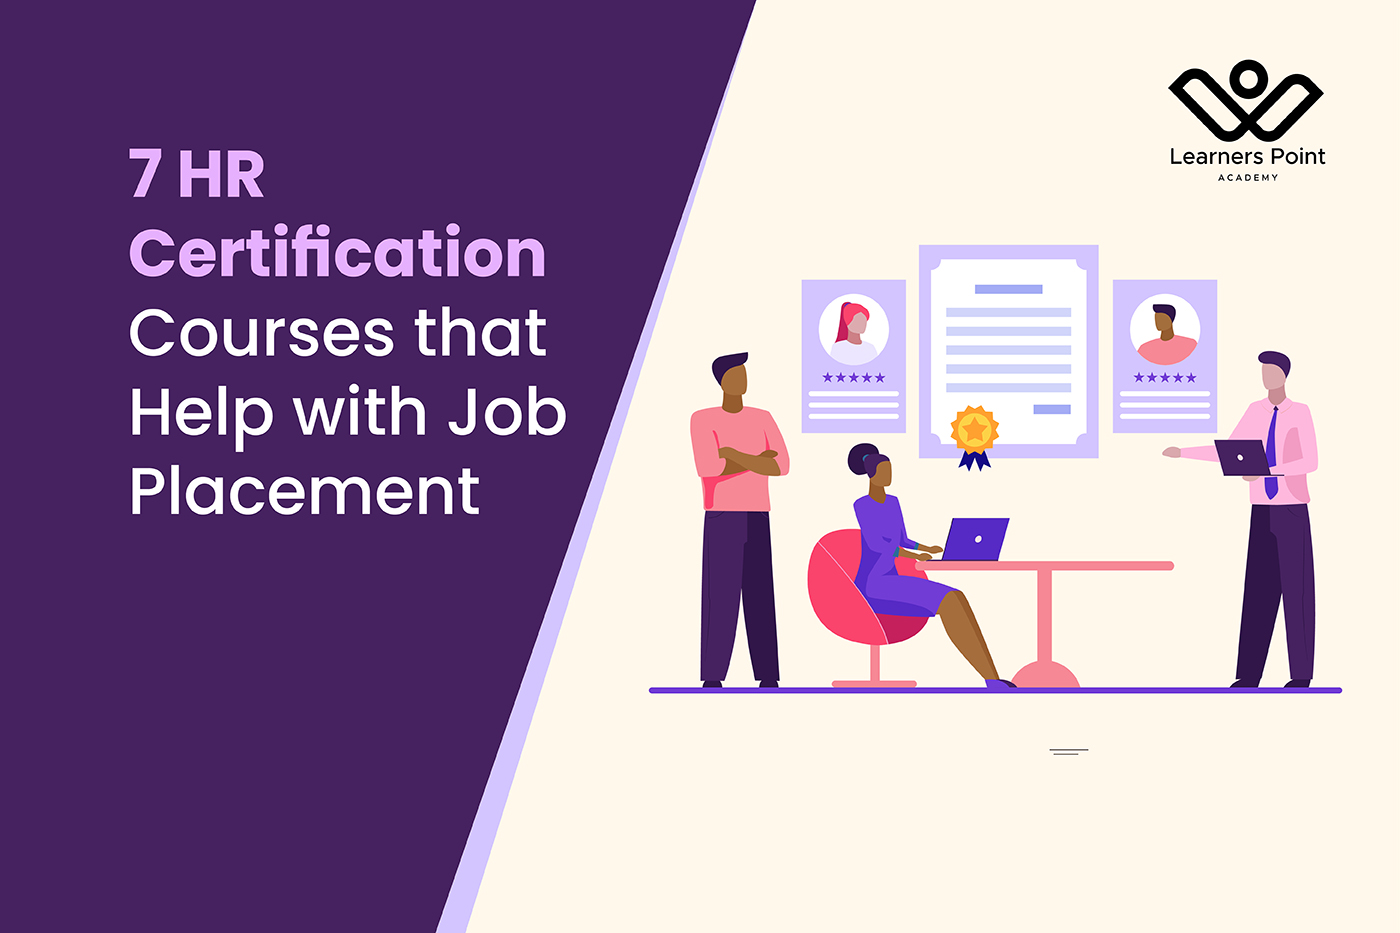 7 HR Certification Courses that Help with Job Placement